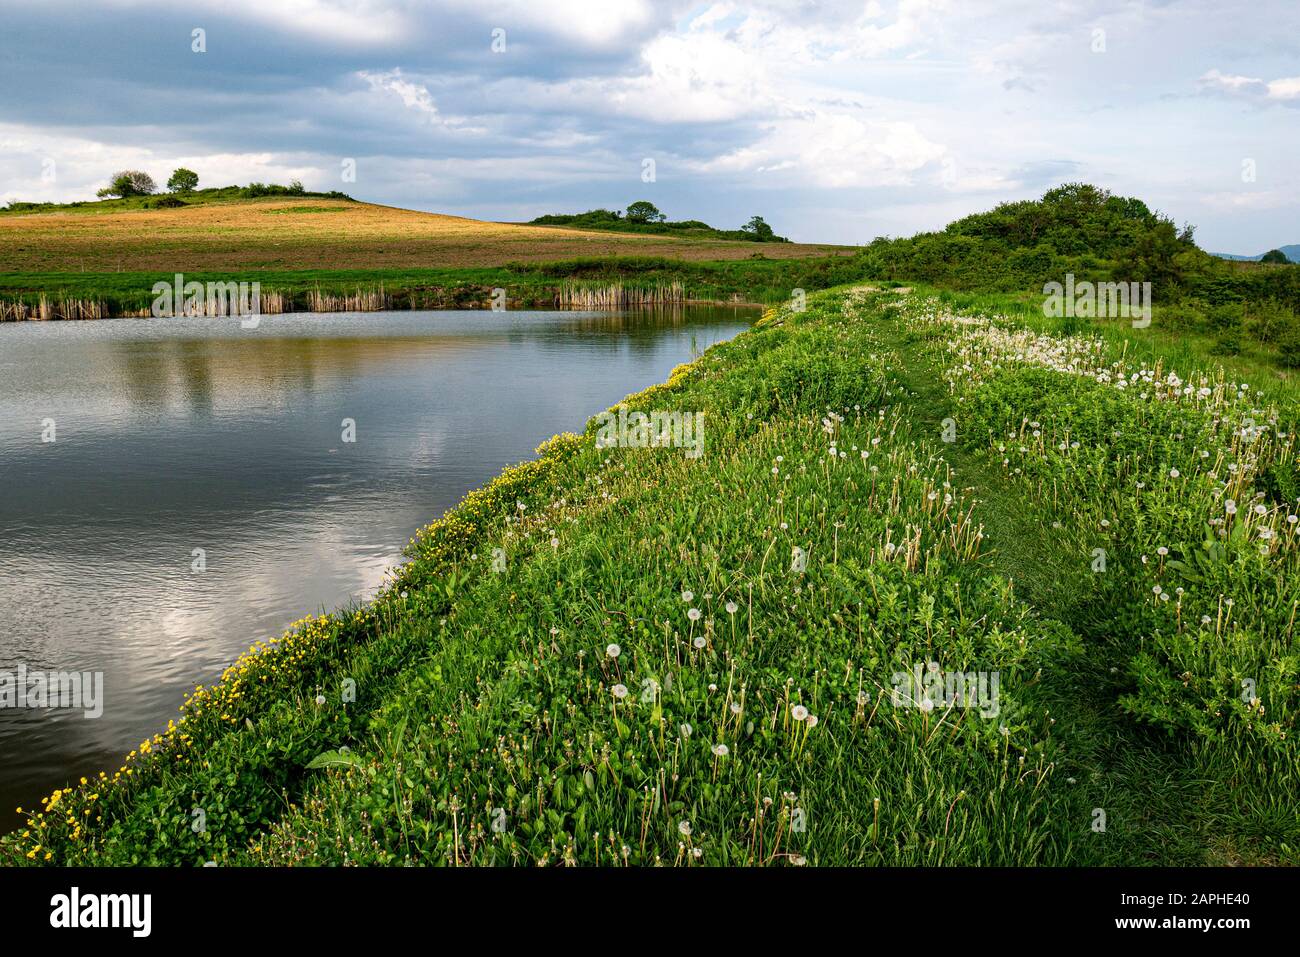 Flowering wild flowers and dandelion on the shore of a lake. The water surface is curled by the wind. Stock Photo